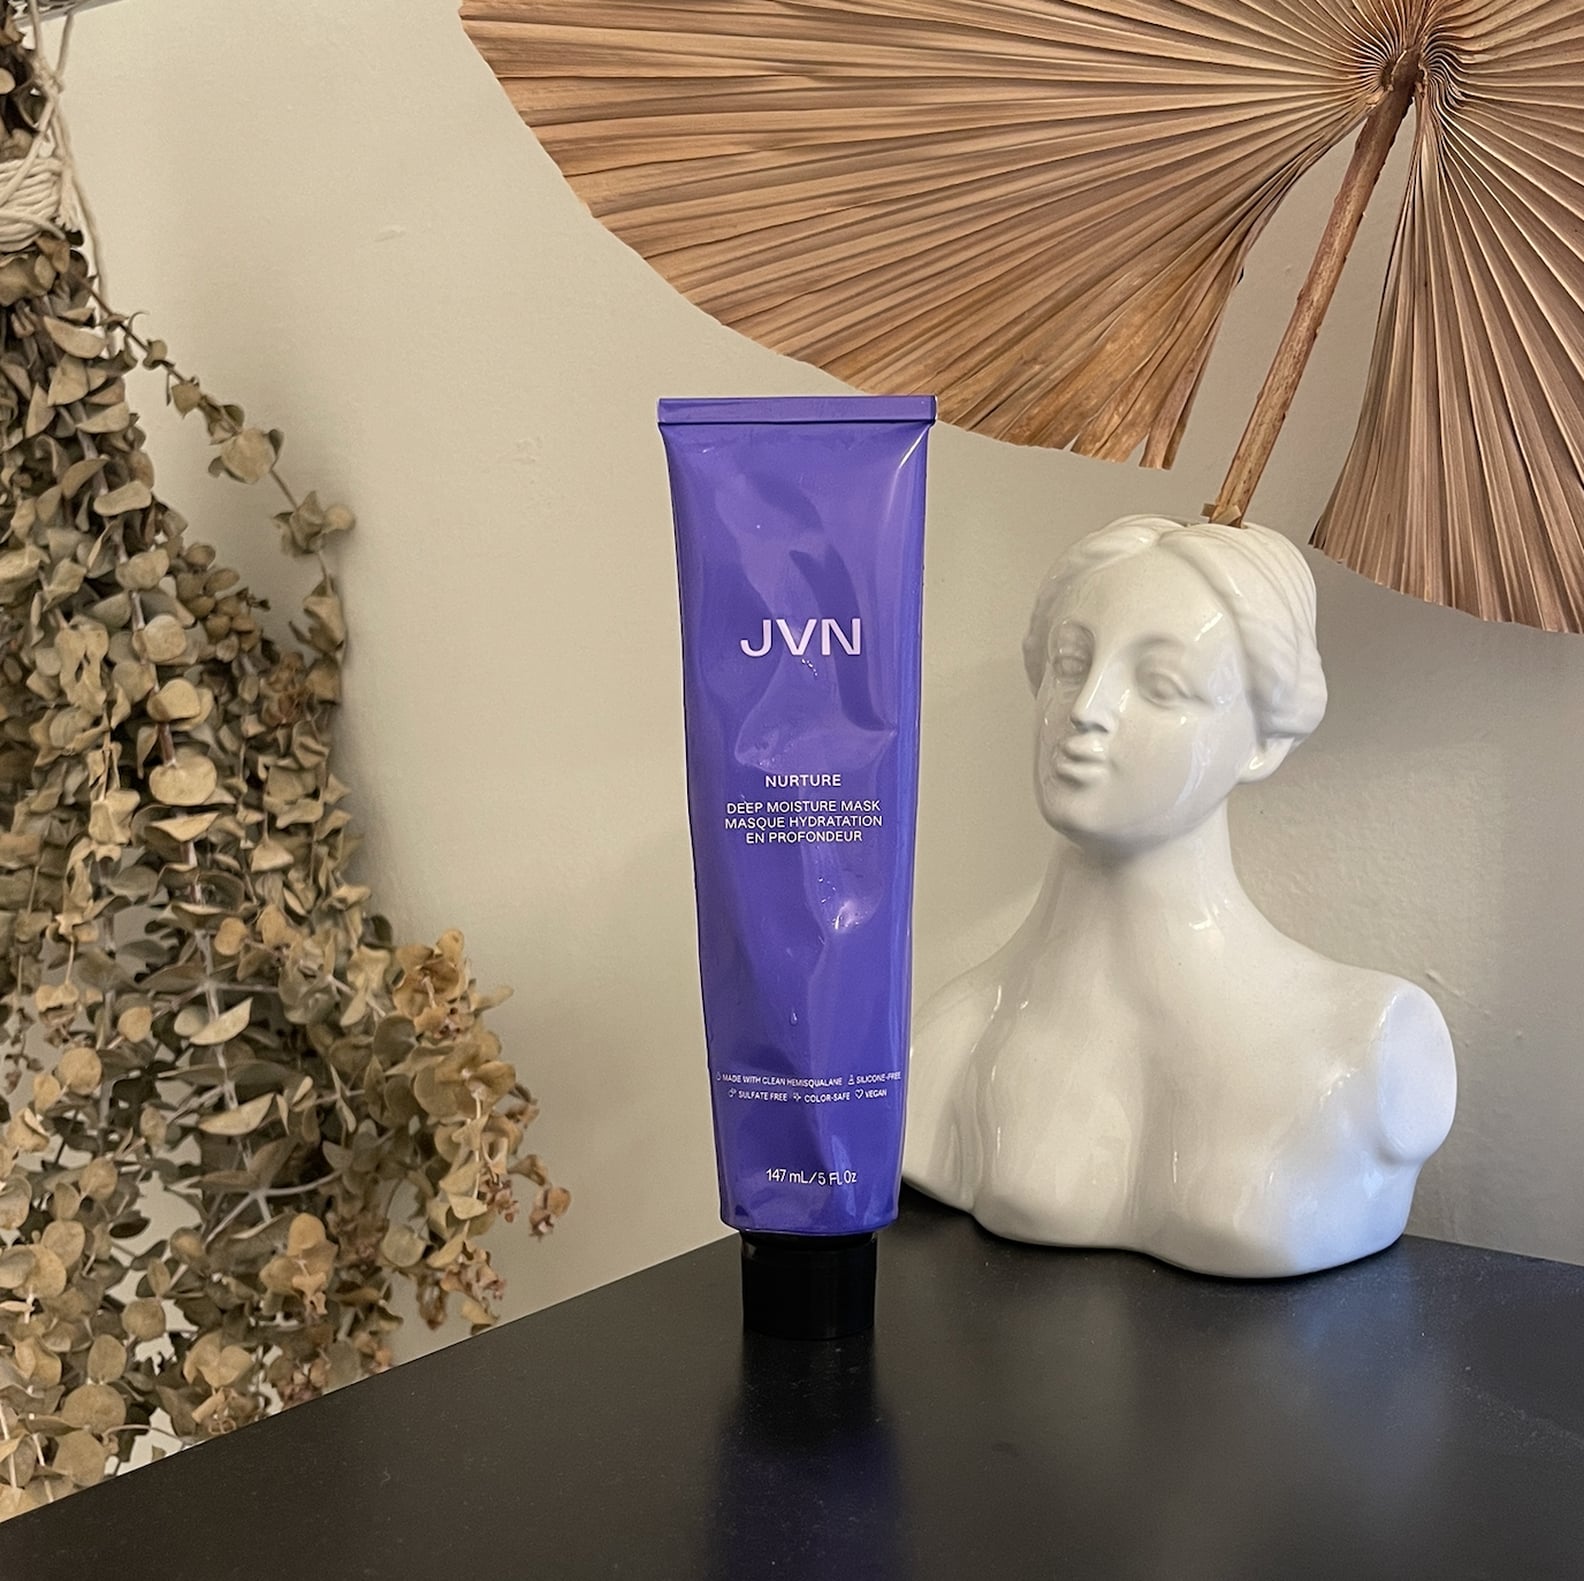 Jvn Hair Product Reviews With Photos Popsugar Beauty 1974